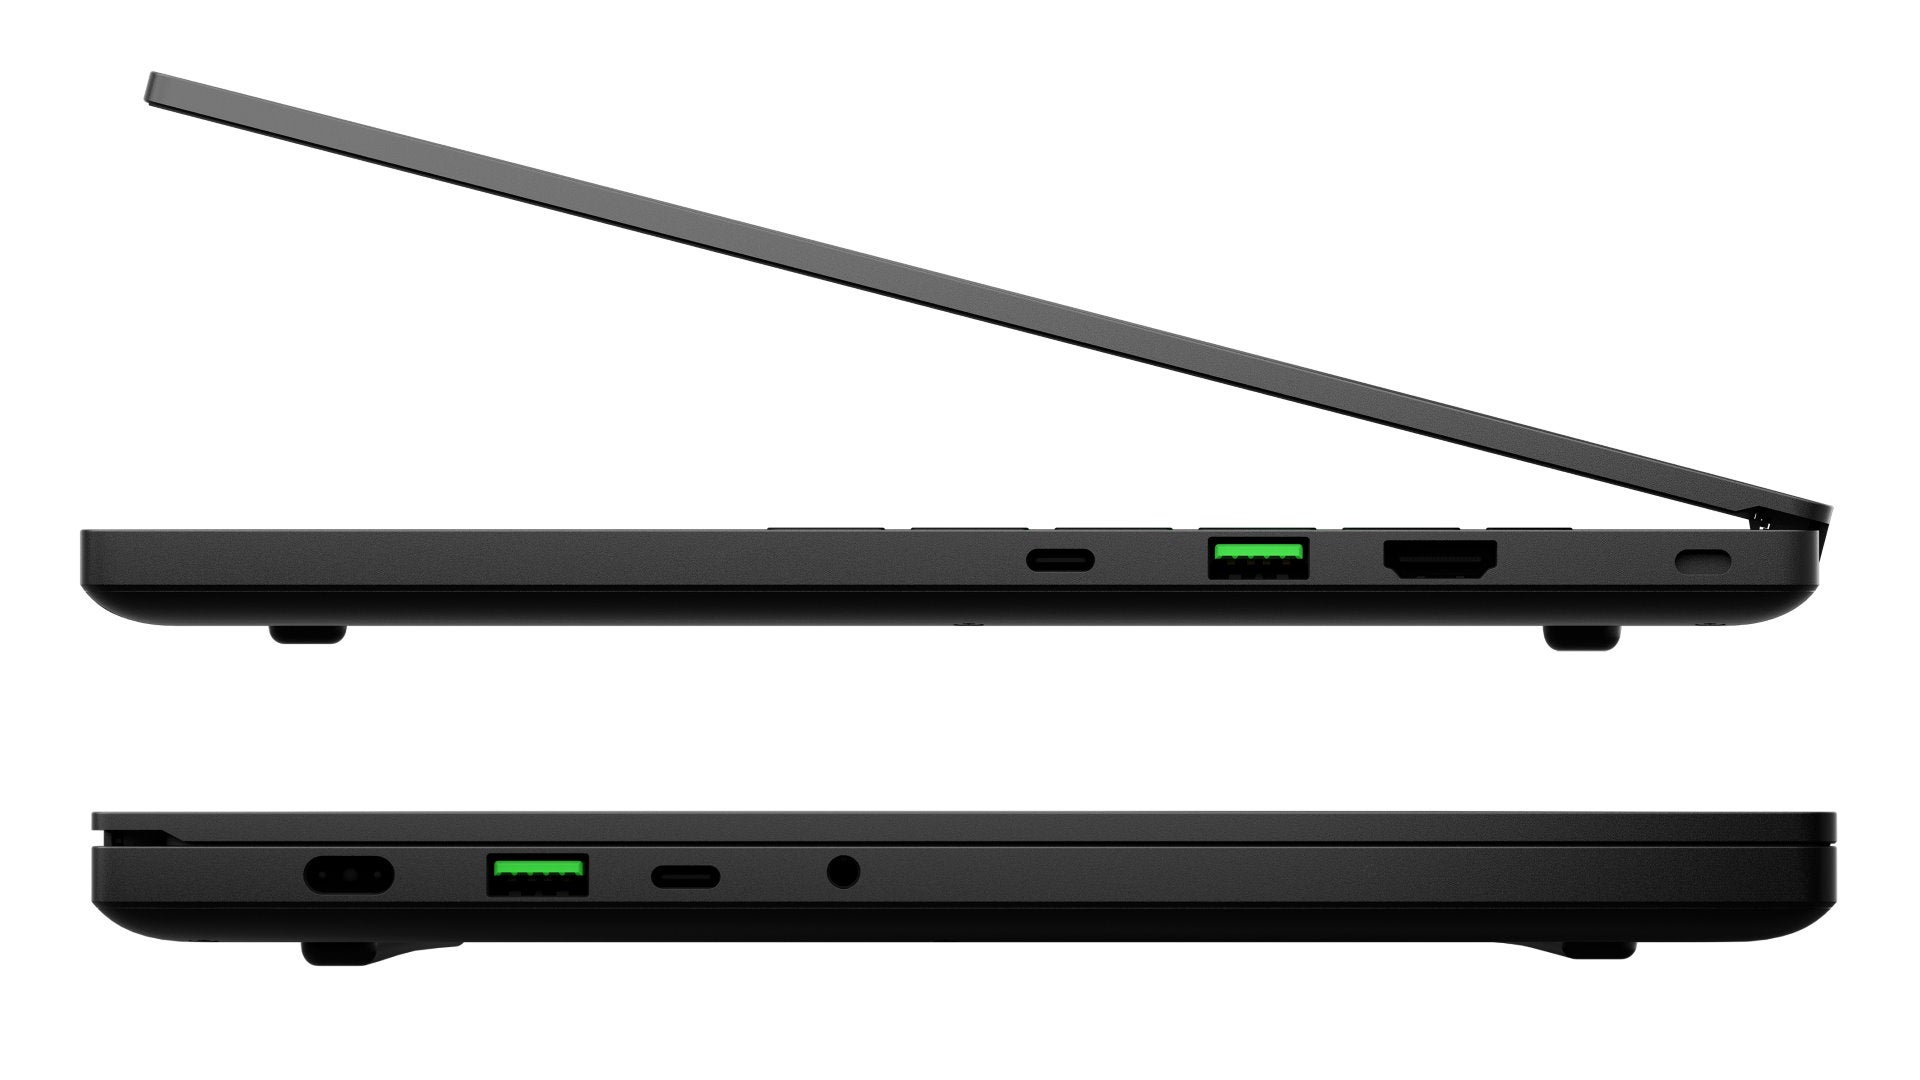 Razer's Blade 14 gaming laptop from the right and left side